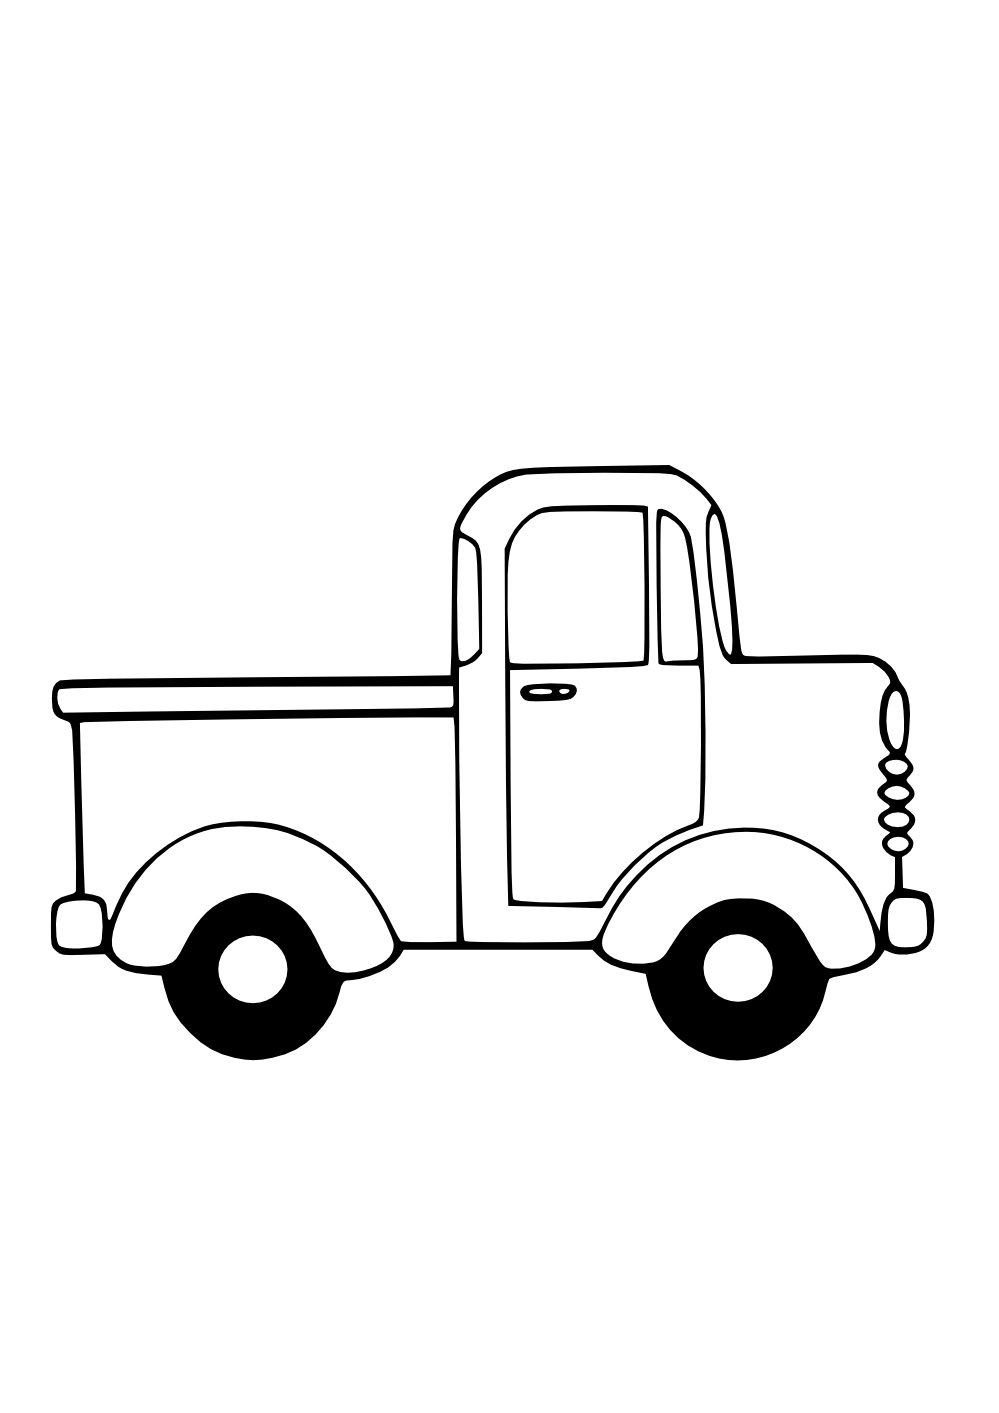 Truck panda free images. E clipart black and white